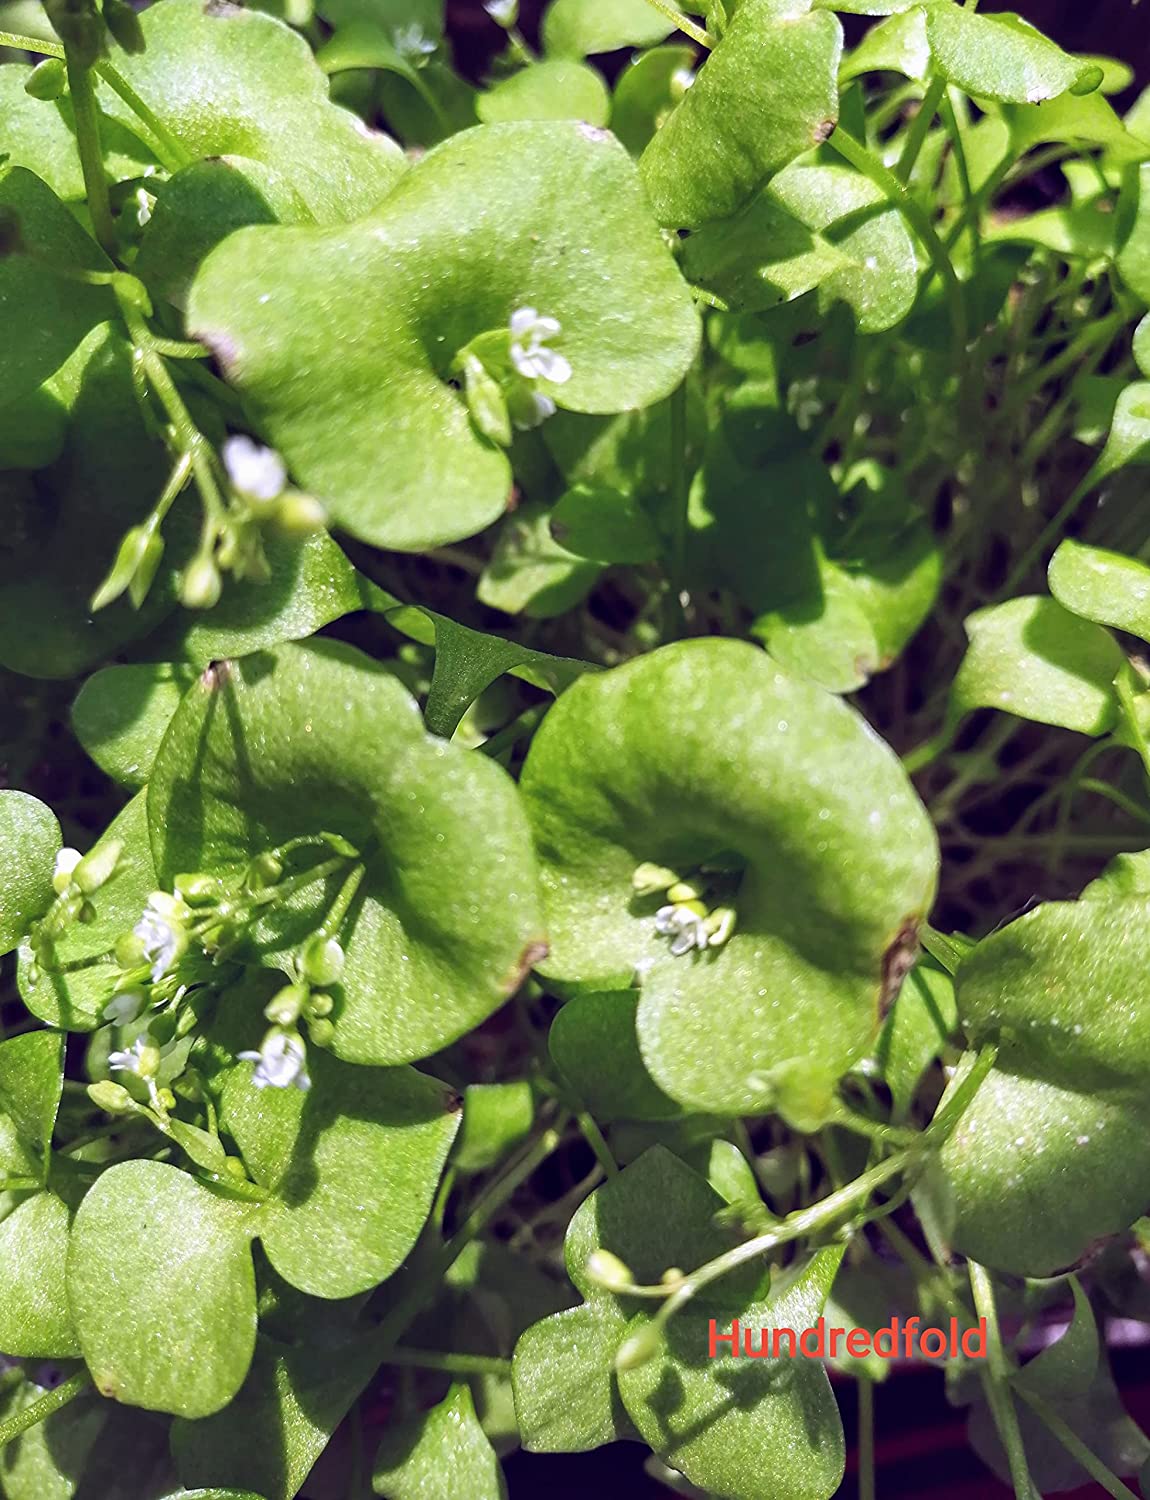 Hundredfold Claytonia Miner’s Lettuce 1000 Seeds – Claytonia perfoliata Miners Lettuce Winter Purslane, Cold-Hardy Salad Green with Crunchy Texture Leafs